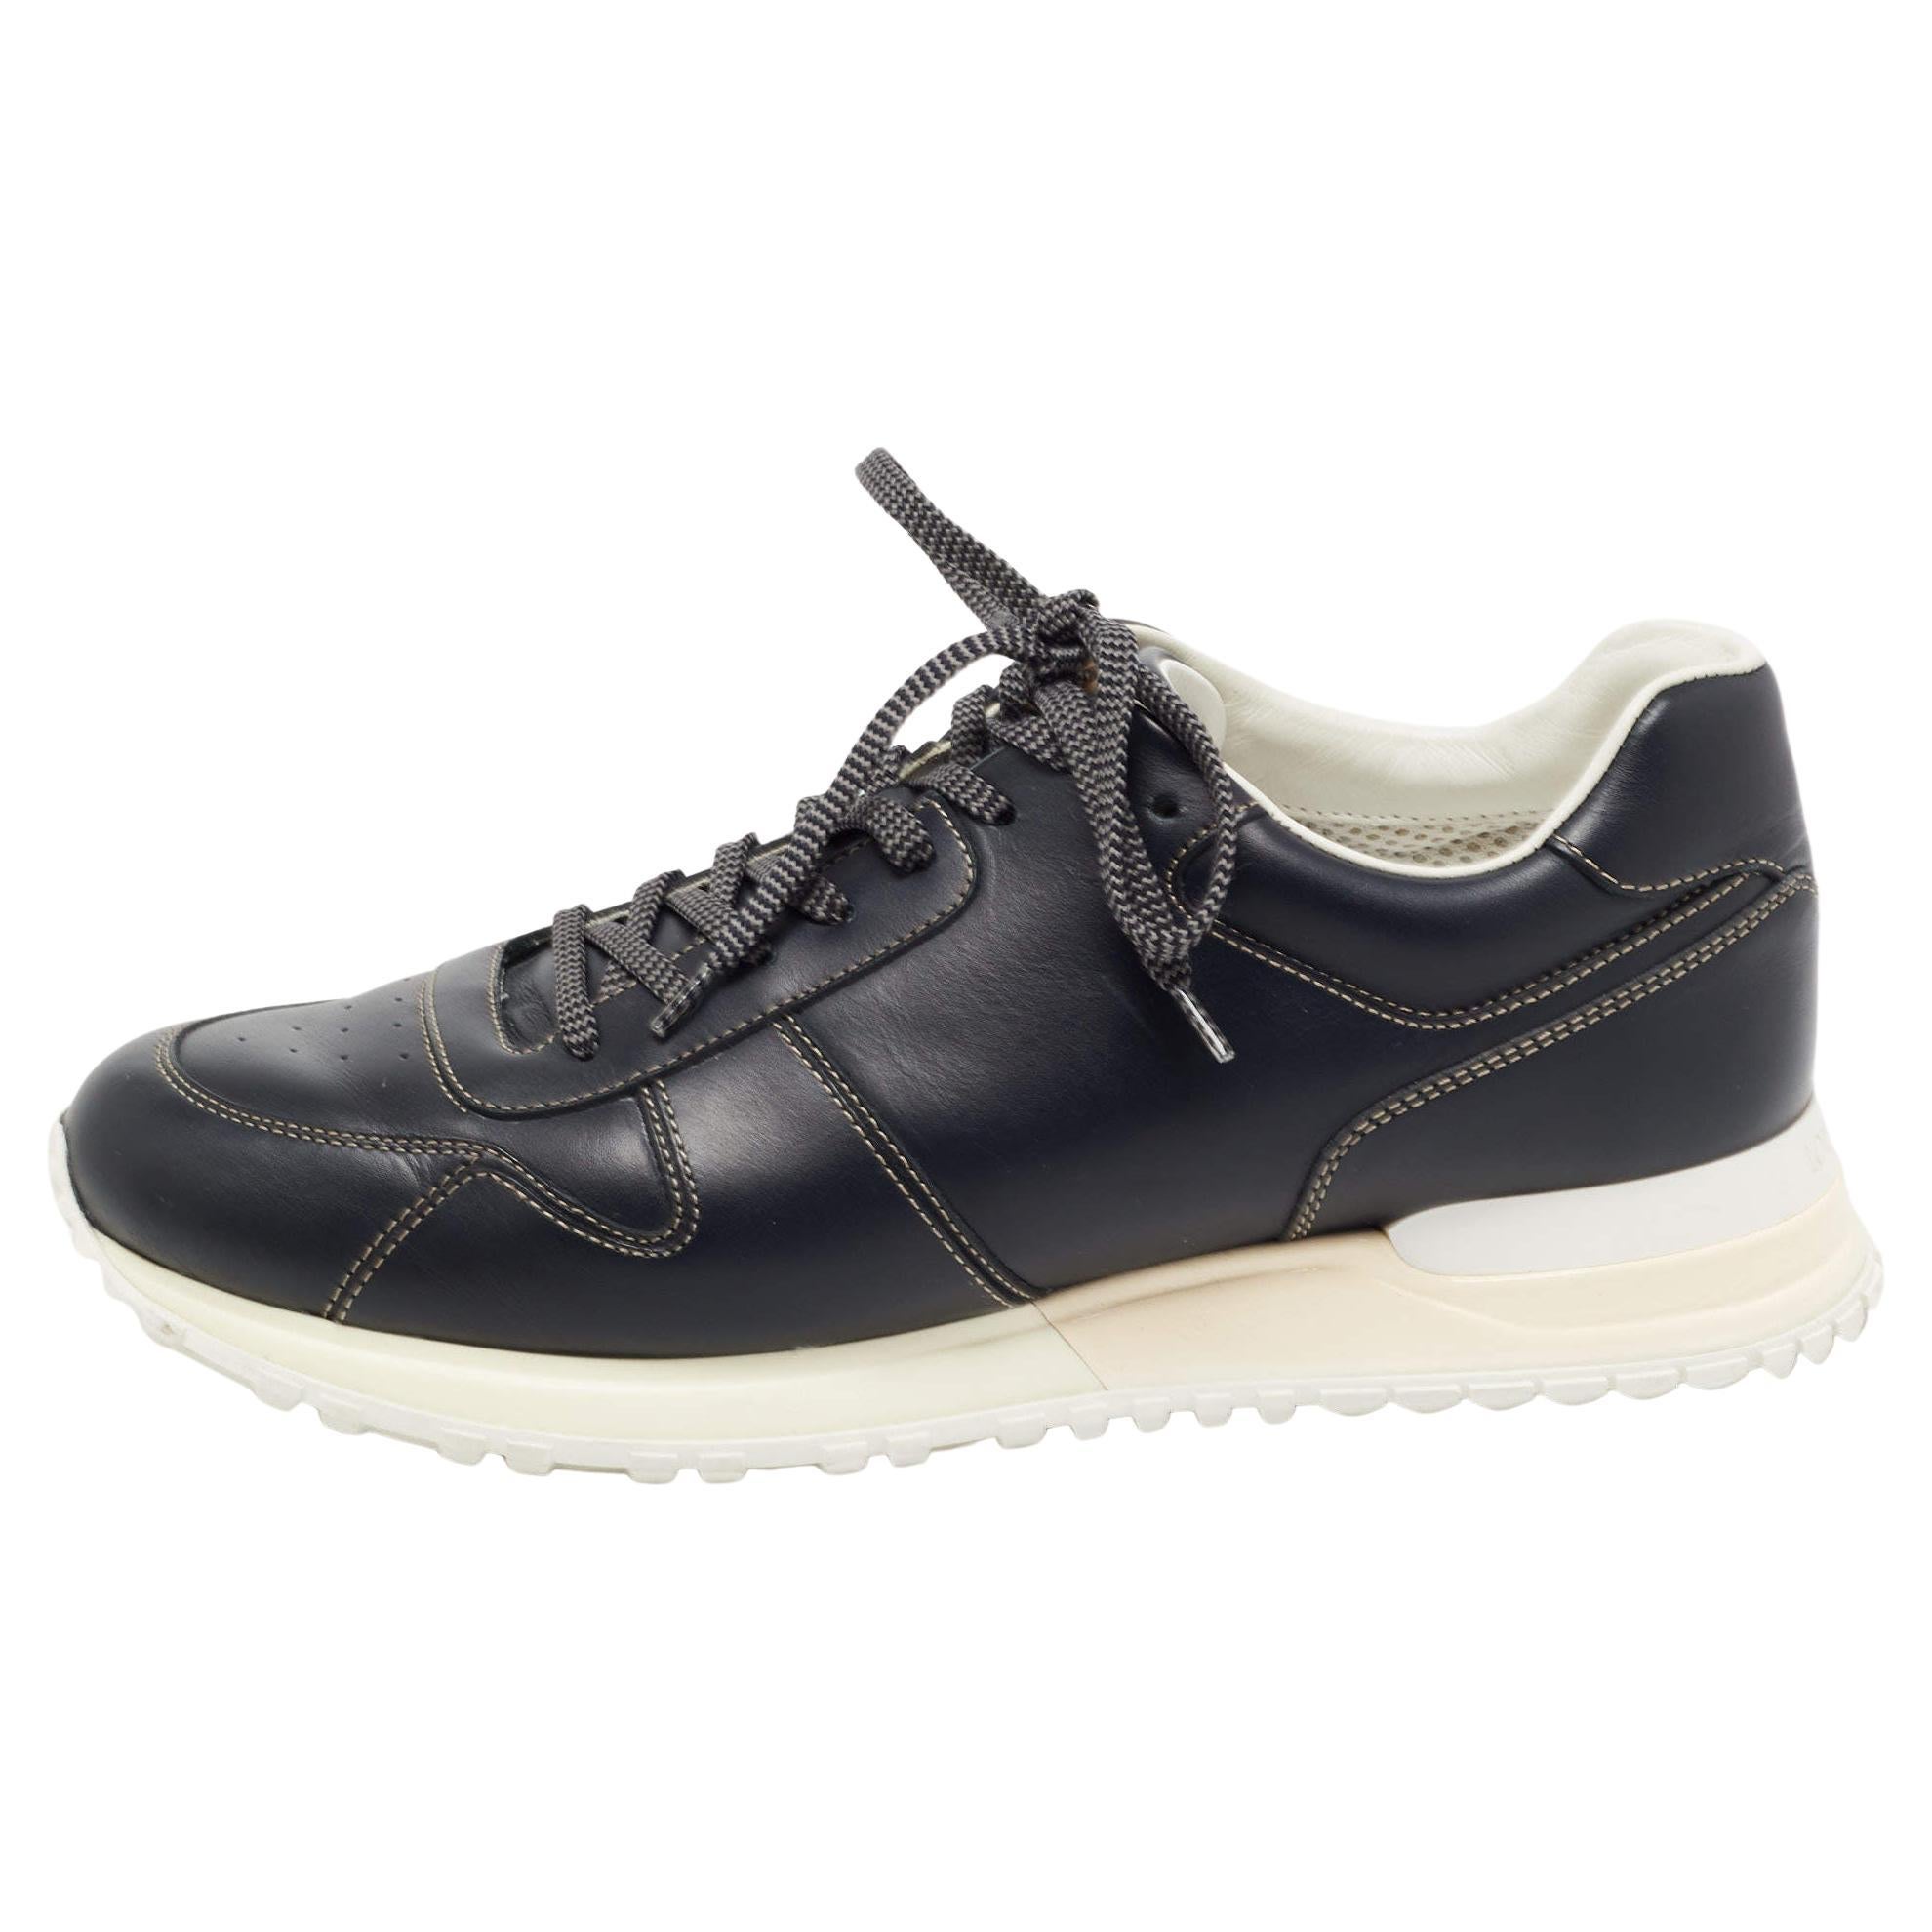 Louis Vuitton Navy Blue Leather Runaway Sneakers Size 39.5